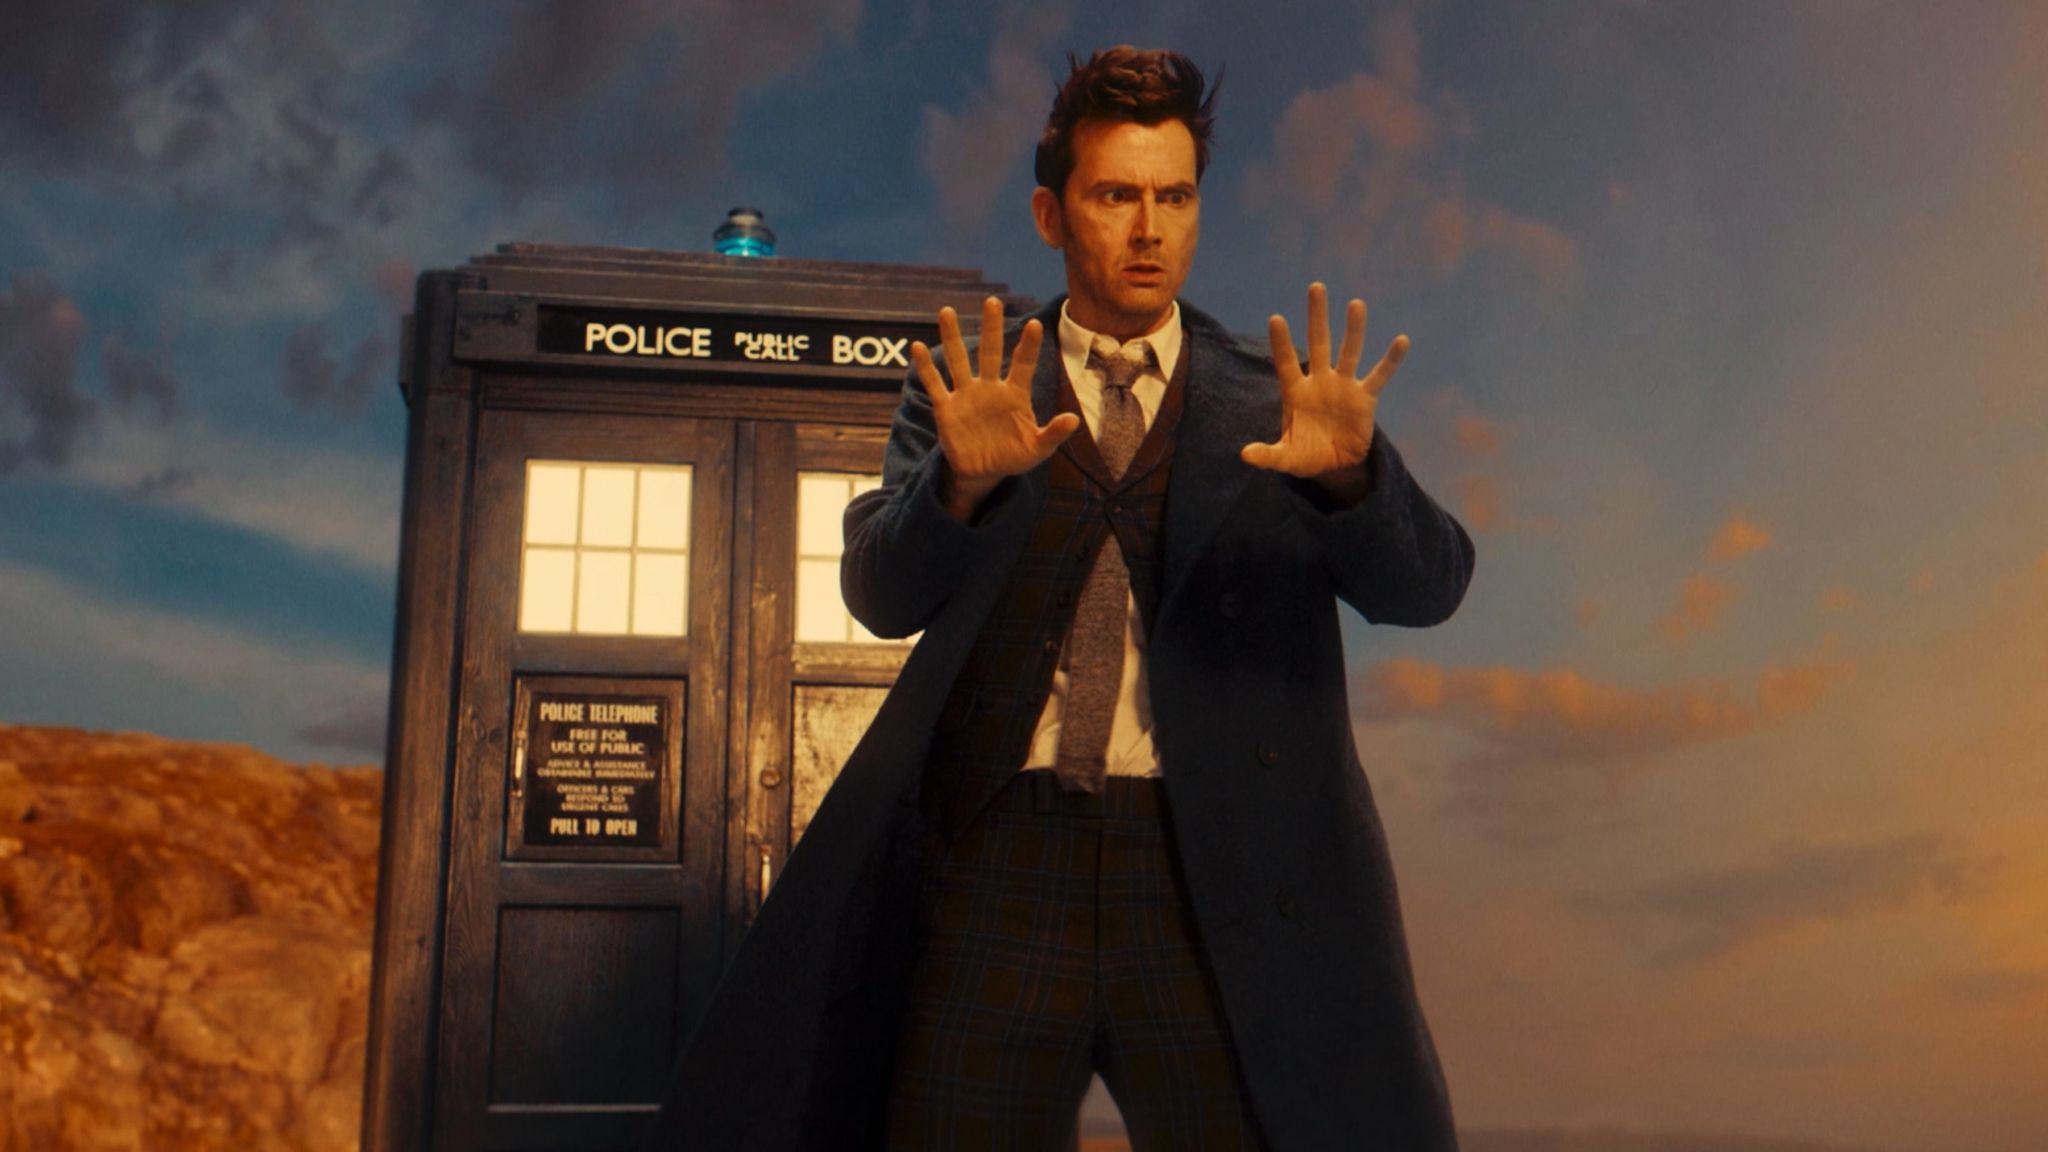 According to science, the knowledge about time travel in “Doctor Who” is incredibly accurate